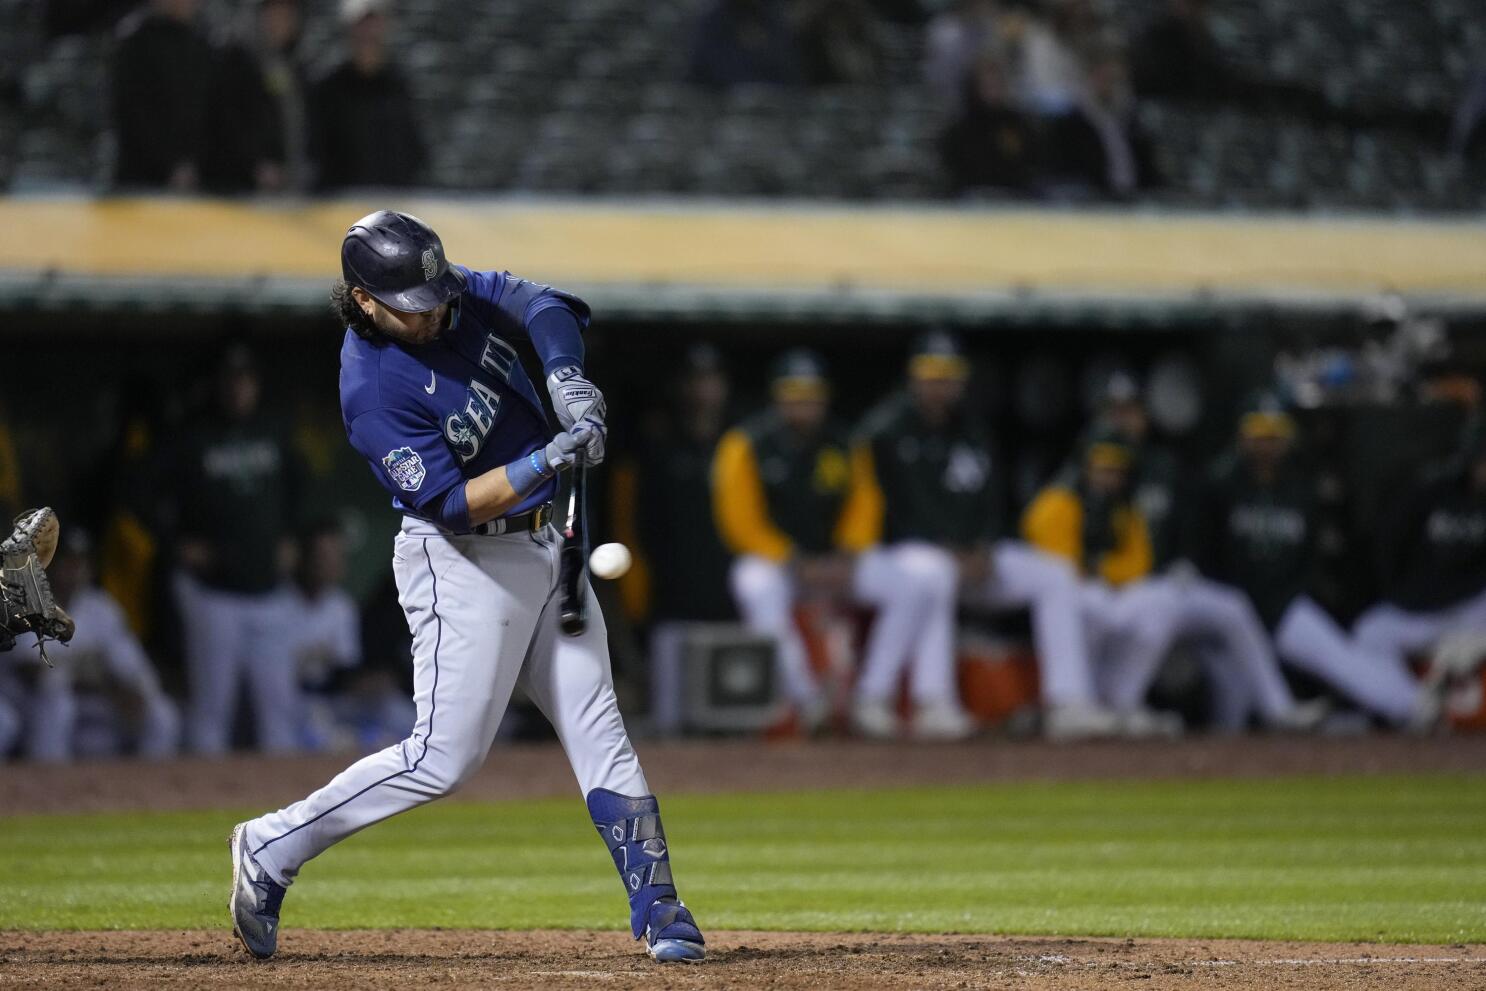 Eugenio Suarez redeems earlier mistake with big home run as Mariners open  series in Texas with win